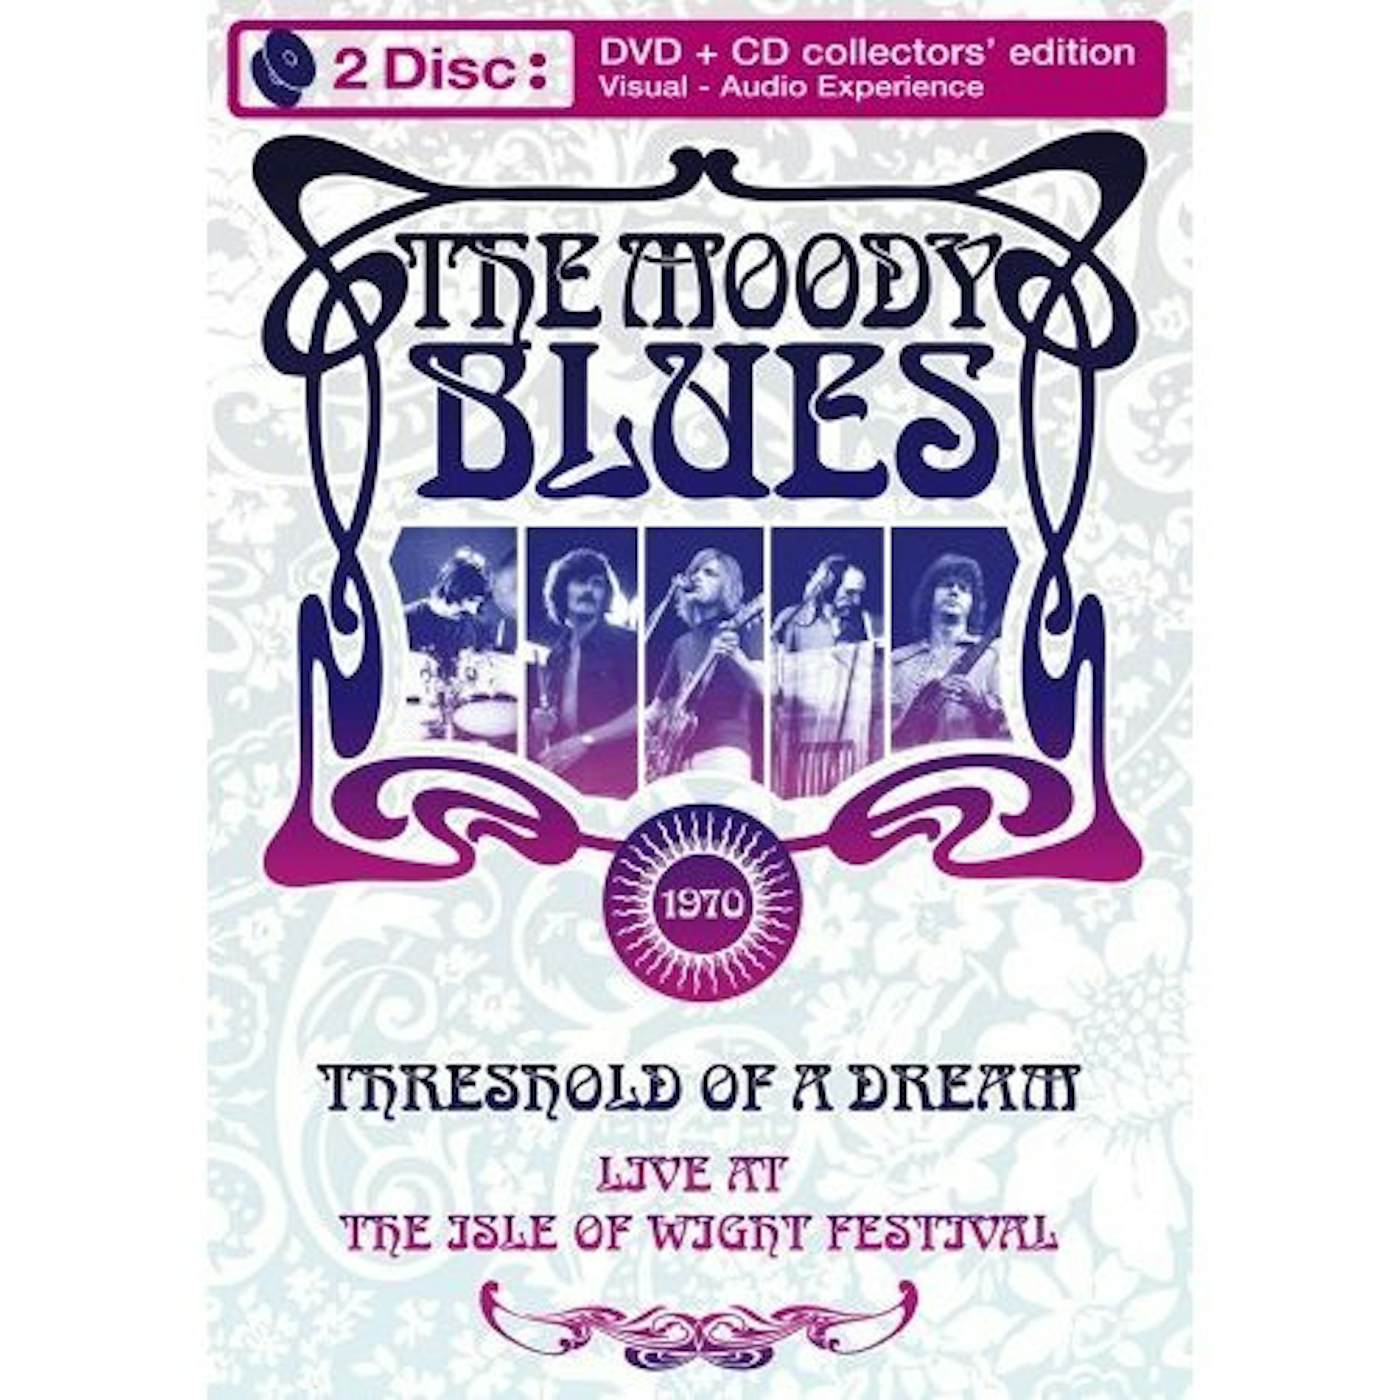 The Moody Blues THRESHOLD OF A DREAM: LIVE AT IOW FESTIVAL 1970 DVD